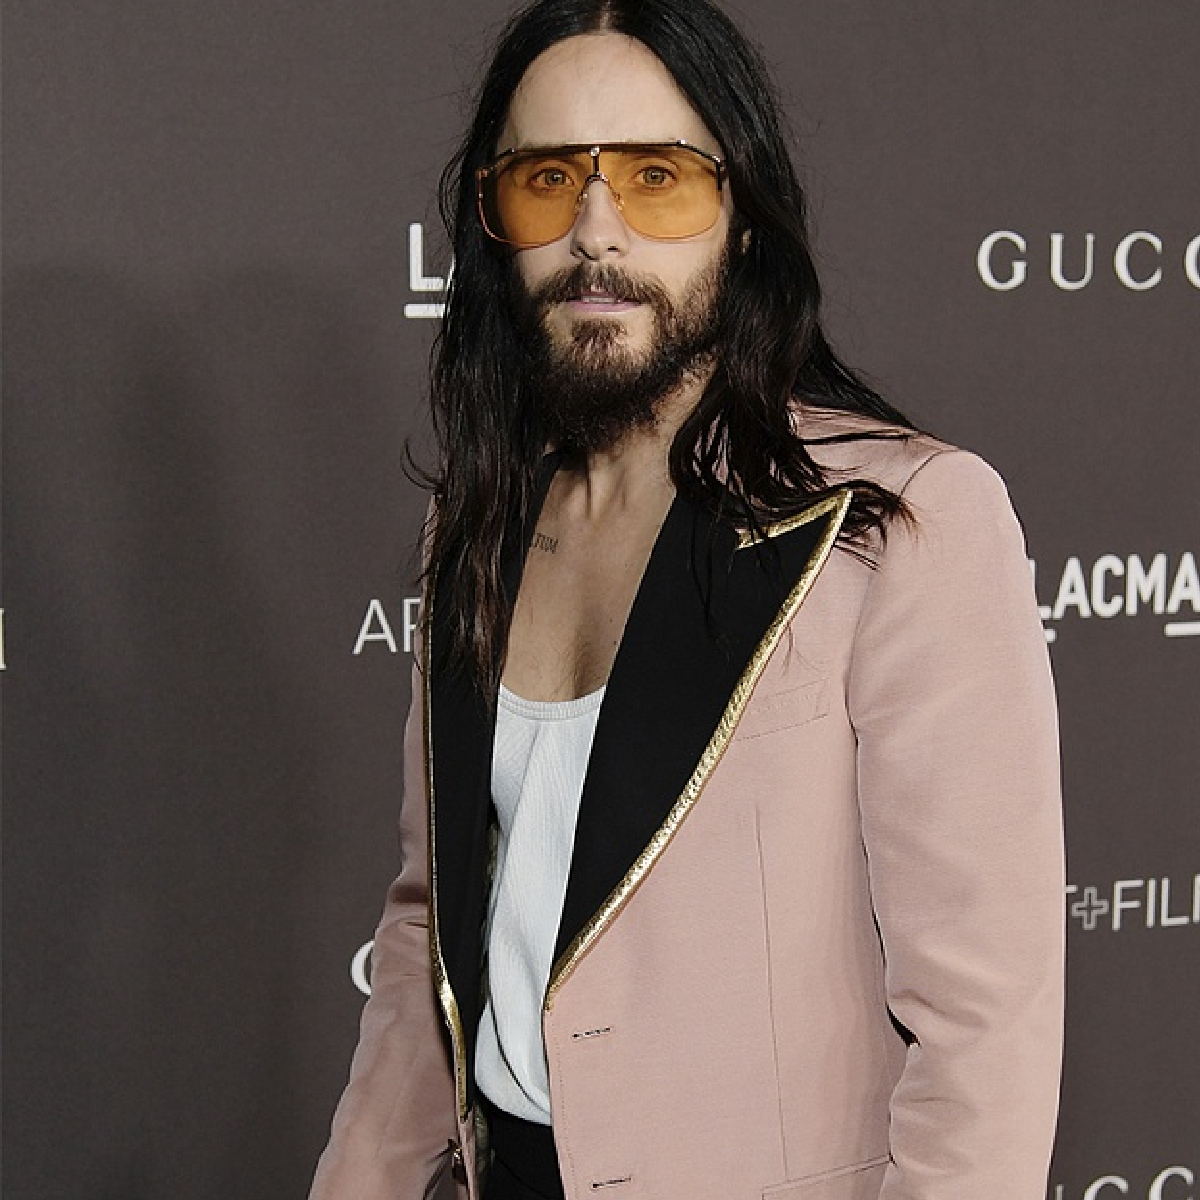 Actor Jared Leto at a 2019 social event